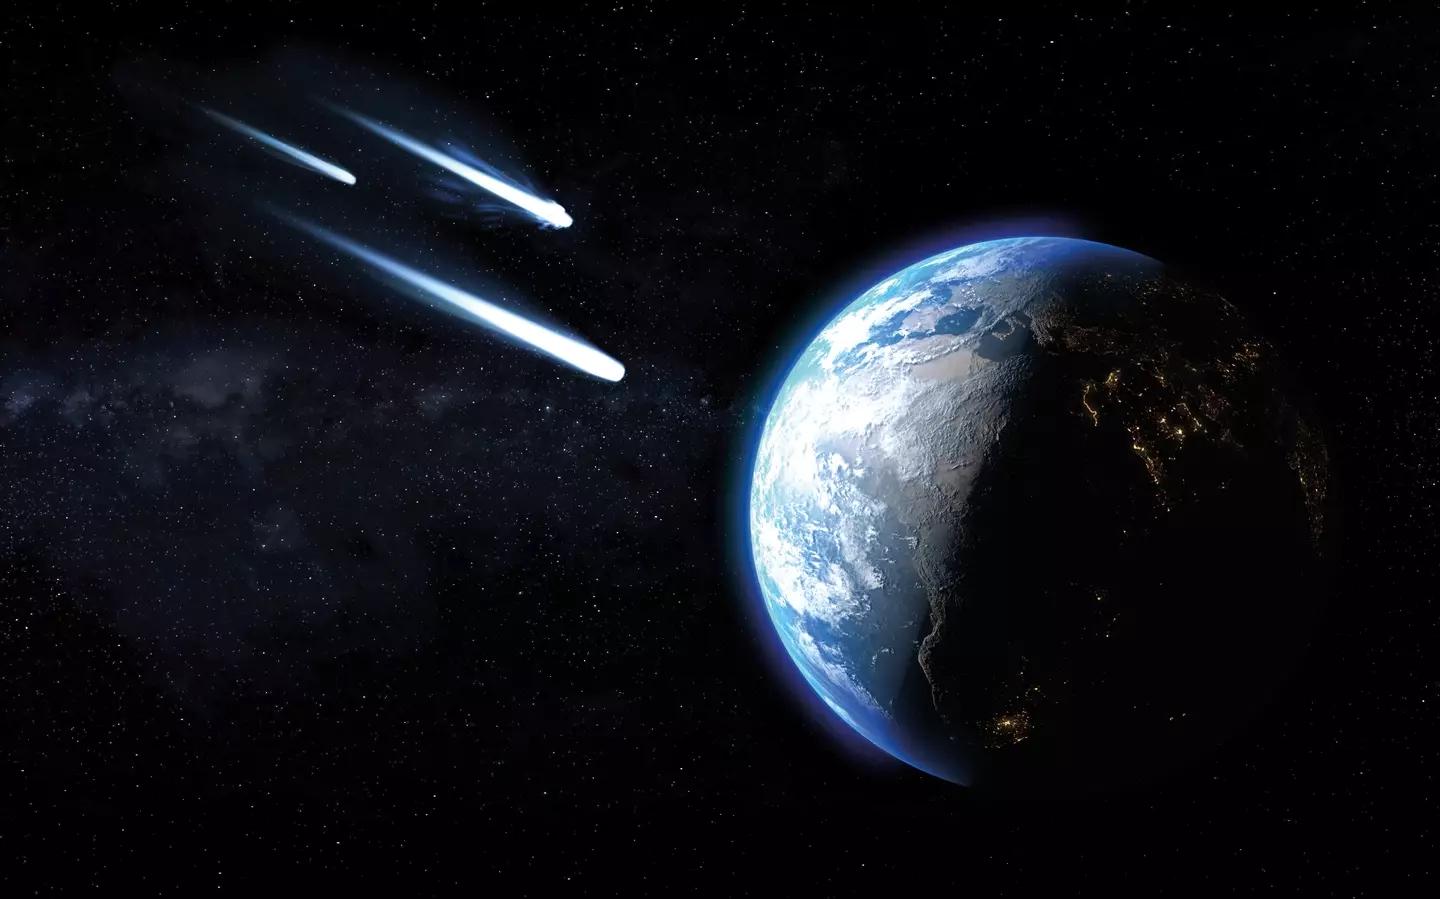 NASA has been working on a defensive strategy for a way to deal with asteroids that are a threat.